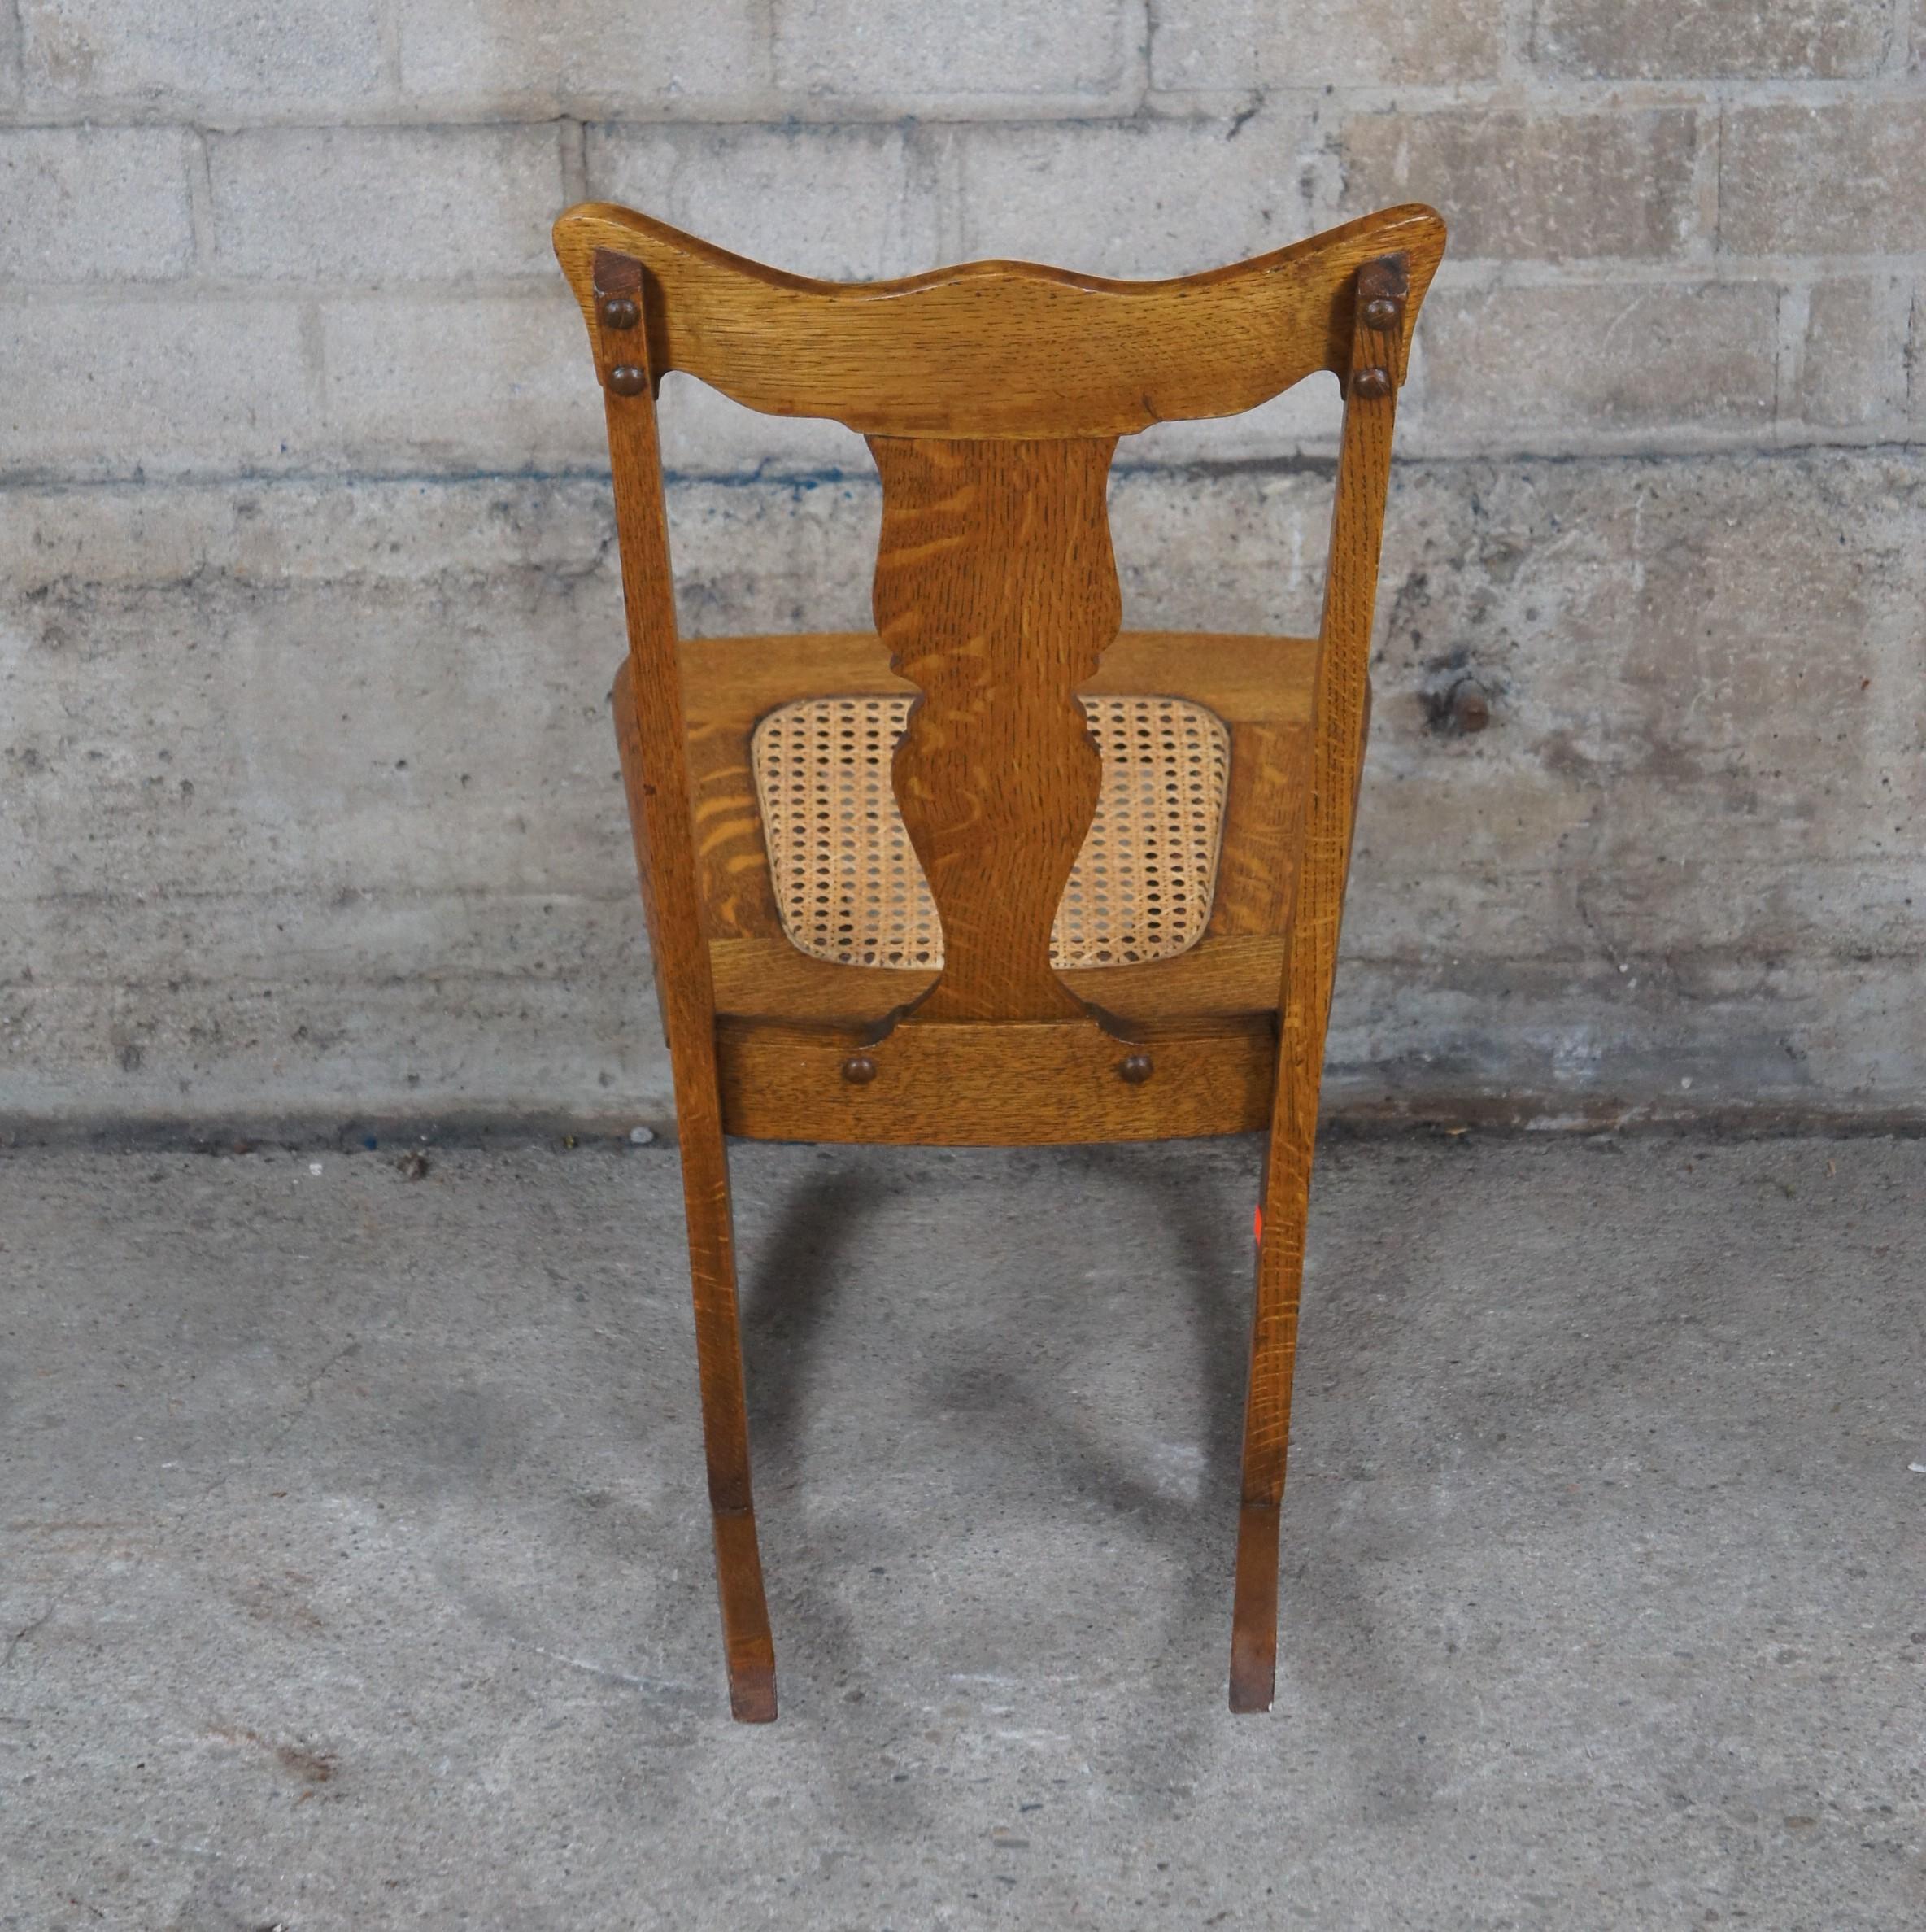 Antique Victorian Stomps Burkhardt Quartersawn Oak Caned Rocker Rocking Chair In Good Condition For Sale In Dayton, OH